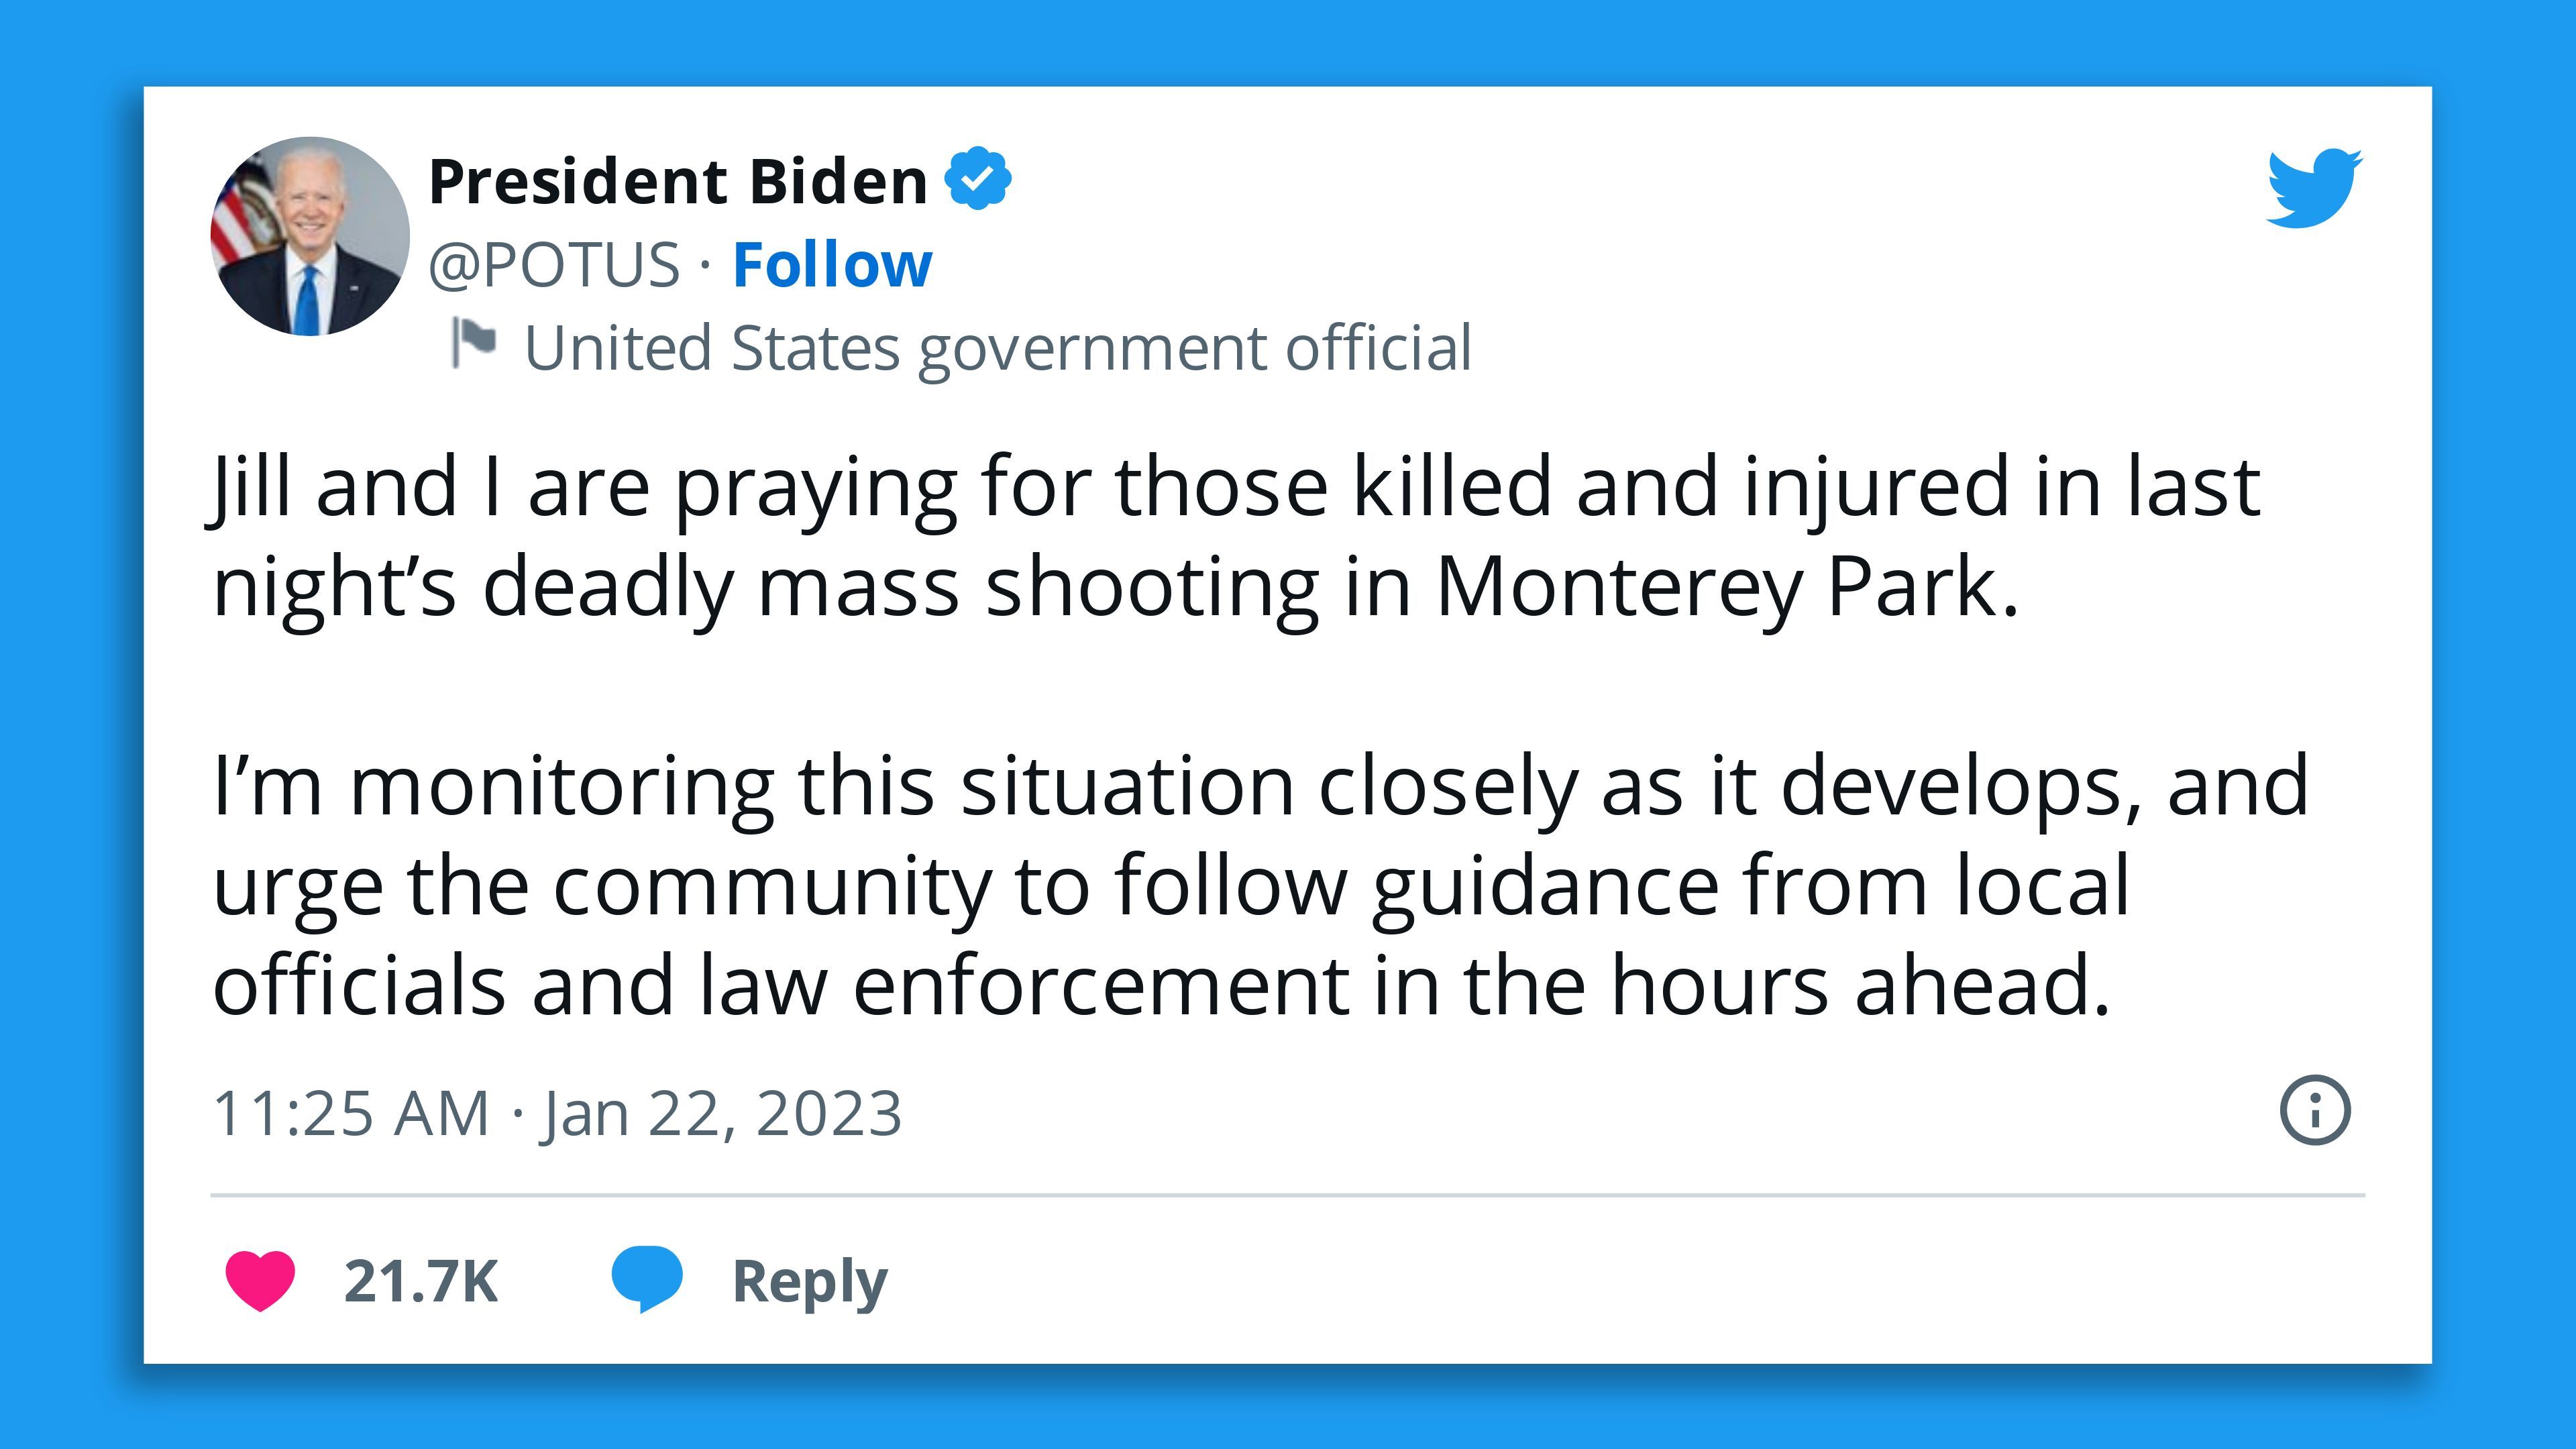 Screenshot of a tweet from President Biden saying he was "Prayers for those killed and injured in last night's deadly mass shooting in Monterey Park," He added that he was monitoring the situation closely.